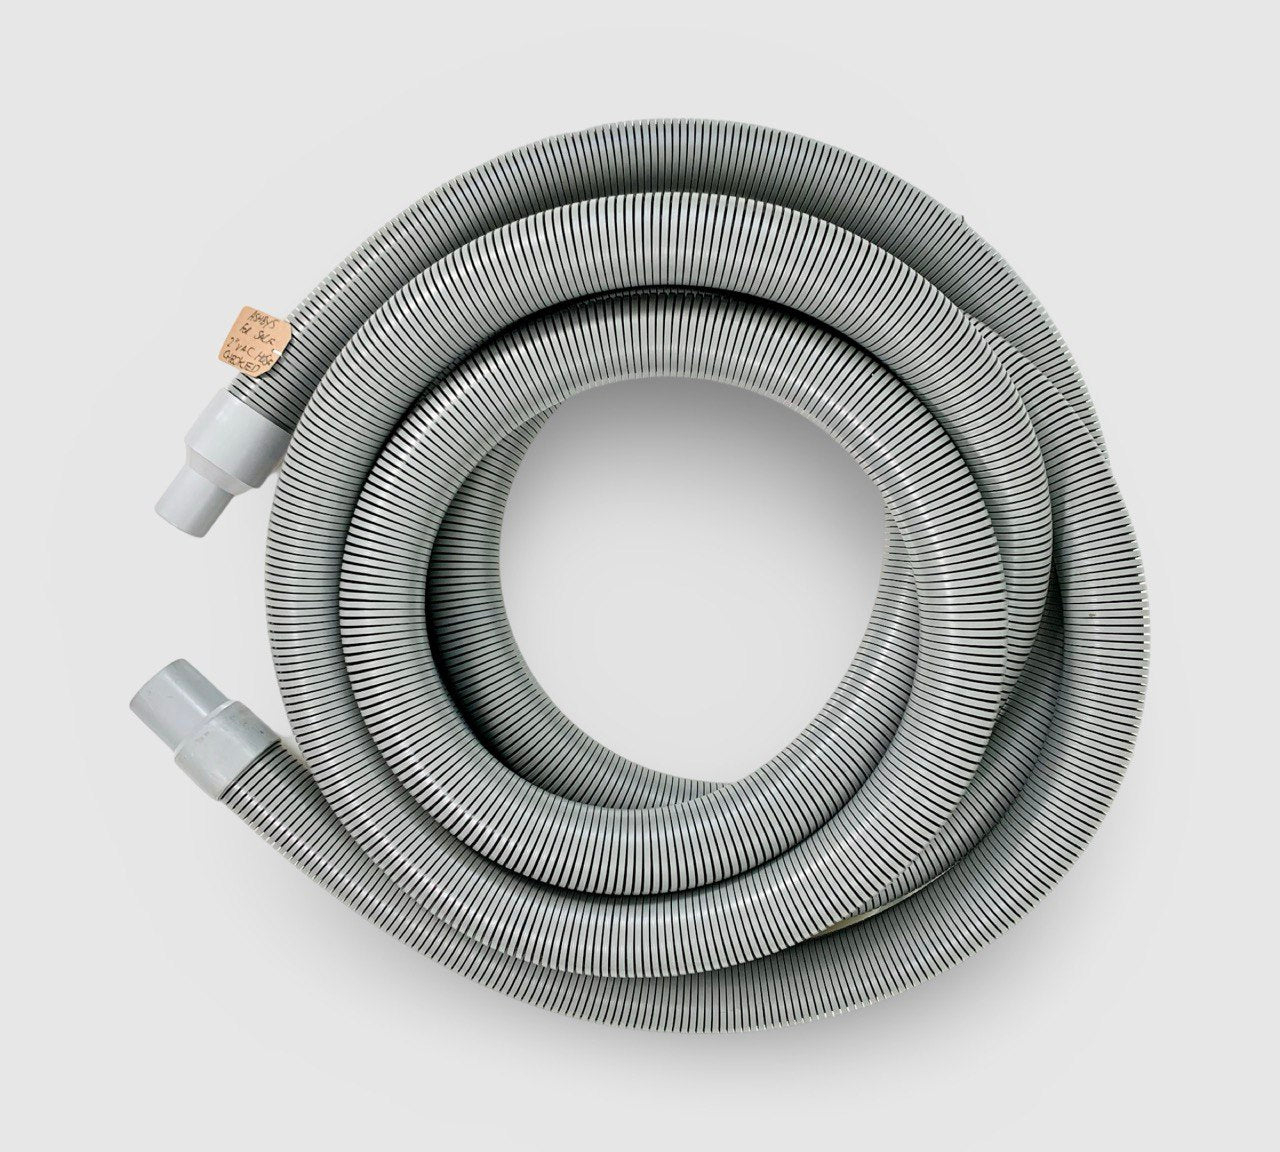 PRE-OWNED 25ft / 7.6m 2 INCH Vacuum Hose ONLY - fitted with 2 inch & 1.5 inch Hose Cuff